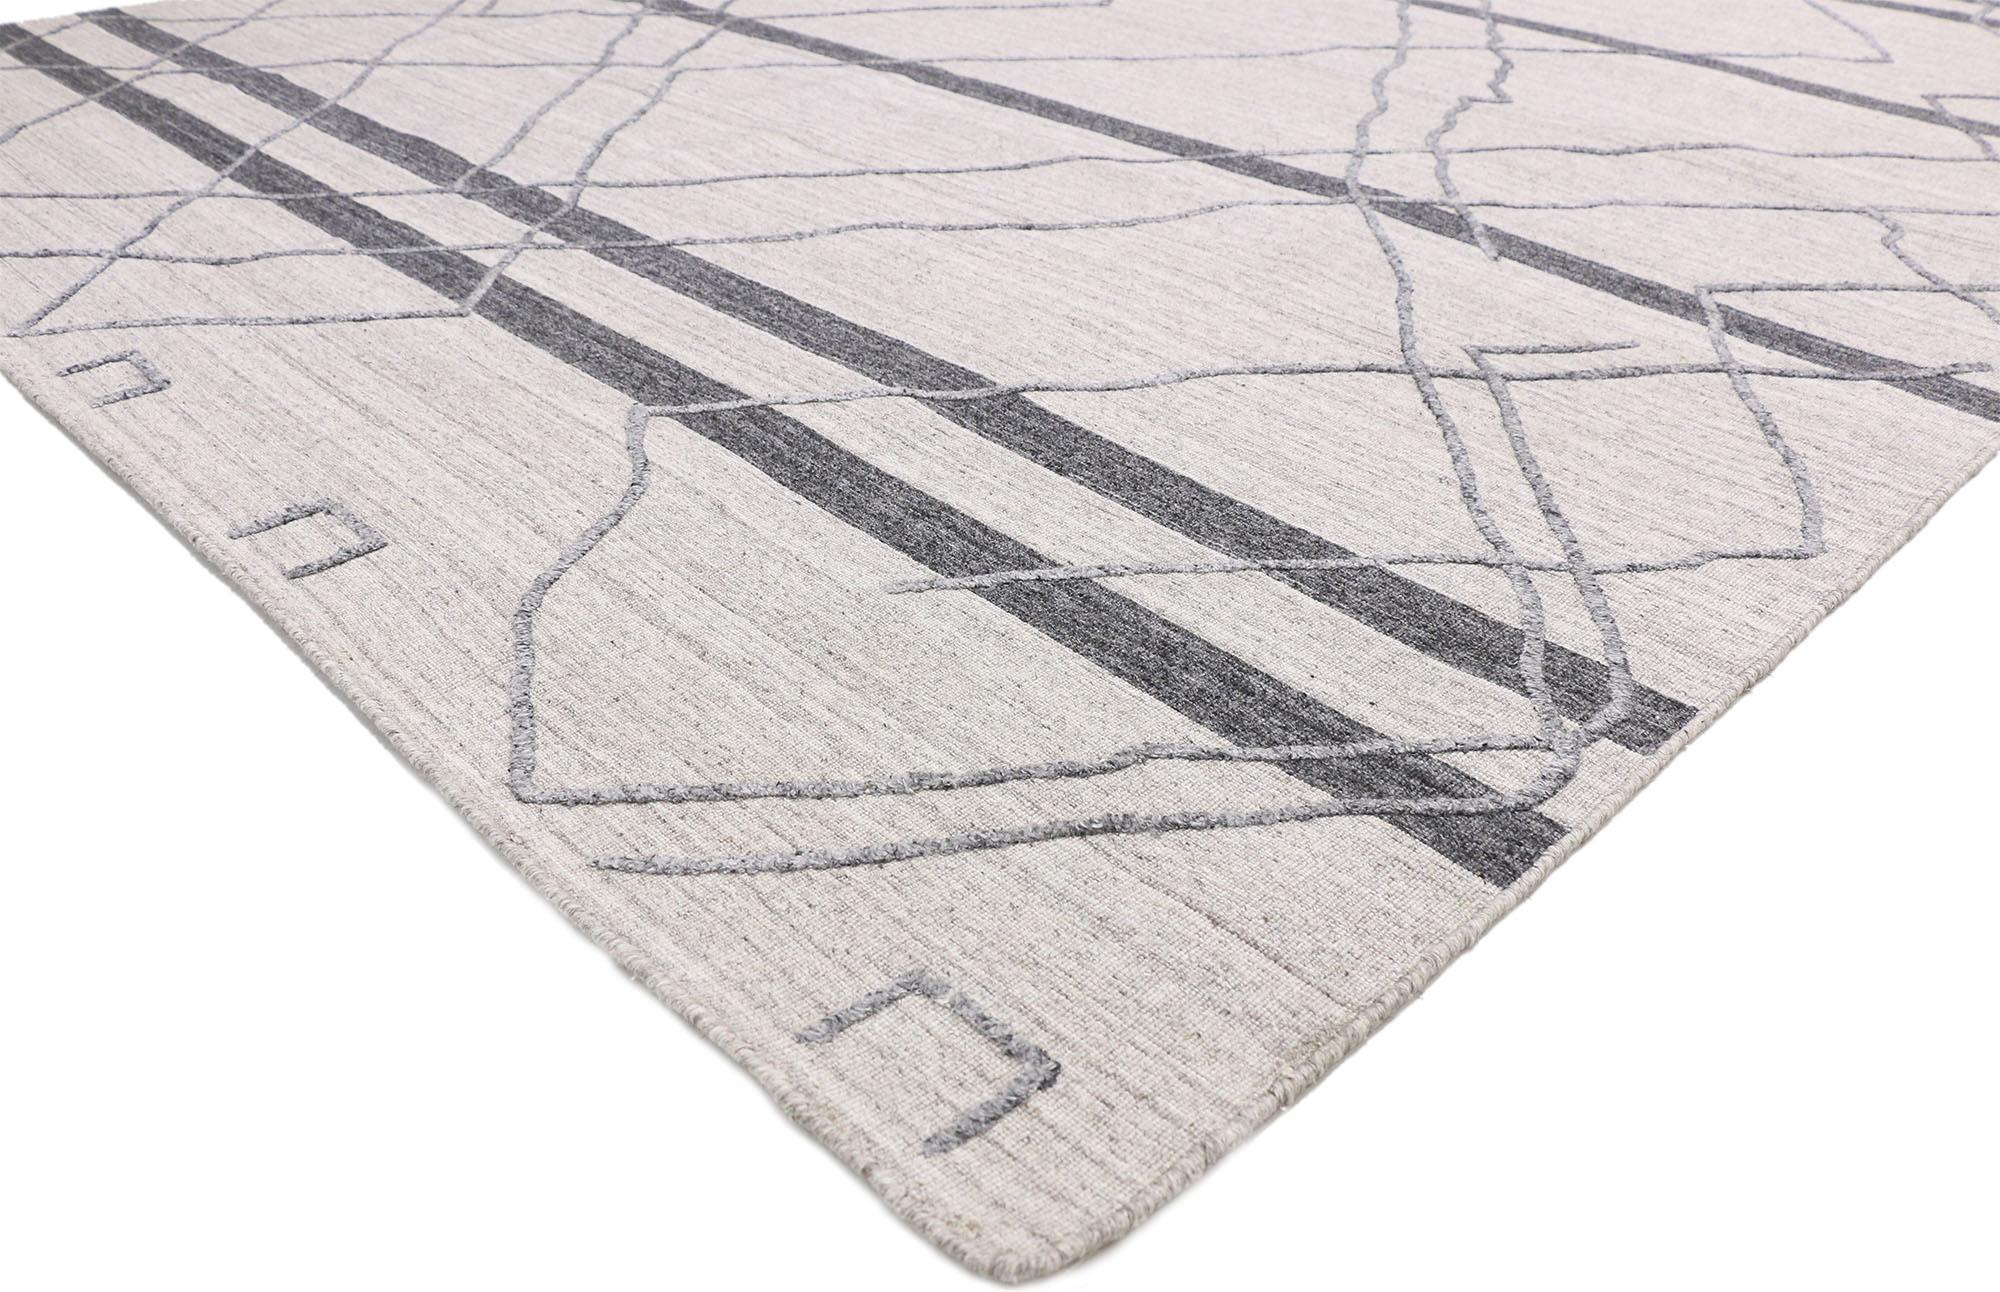 30409, new contemporary gray modern Moroccan style area rug with raised design, texture area rug. Warm hygge vibes meet tribal designs in this contemporary Moroccan style gray rug. A dynamic fusion of contemporary trends and nomadic tribal